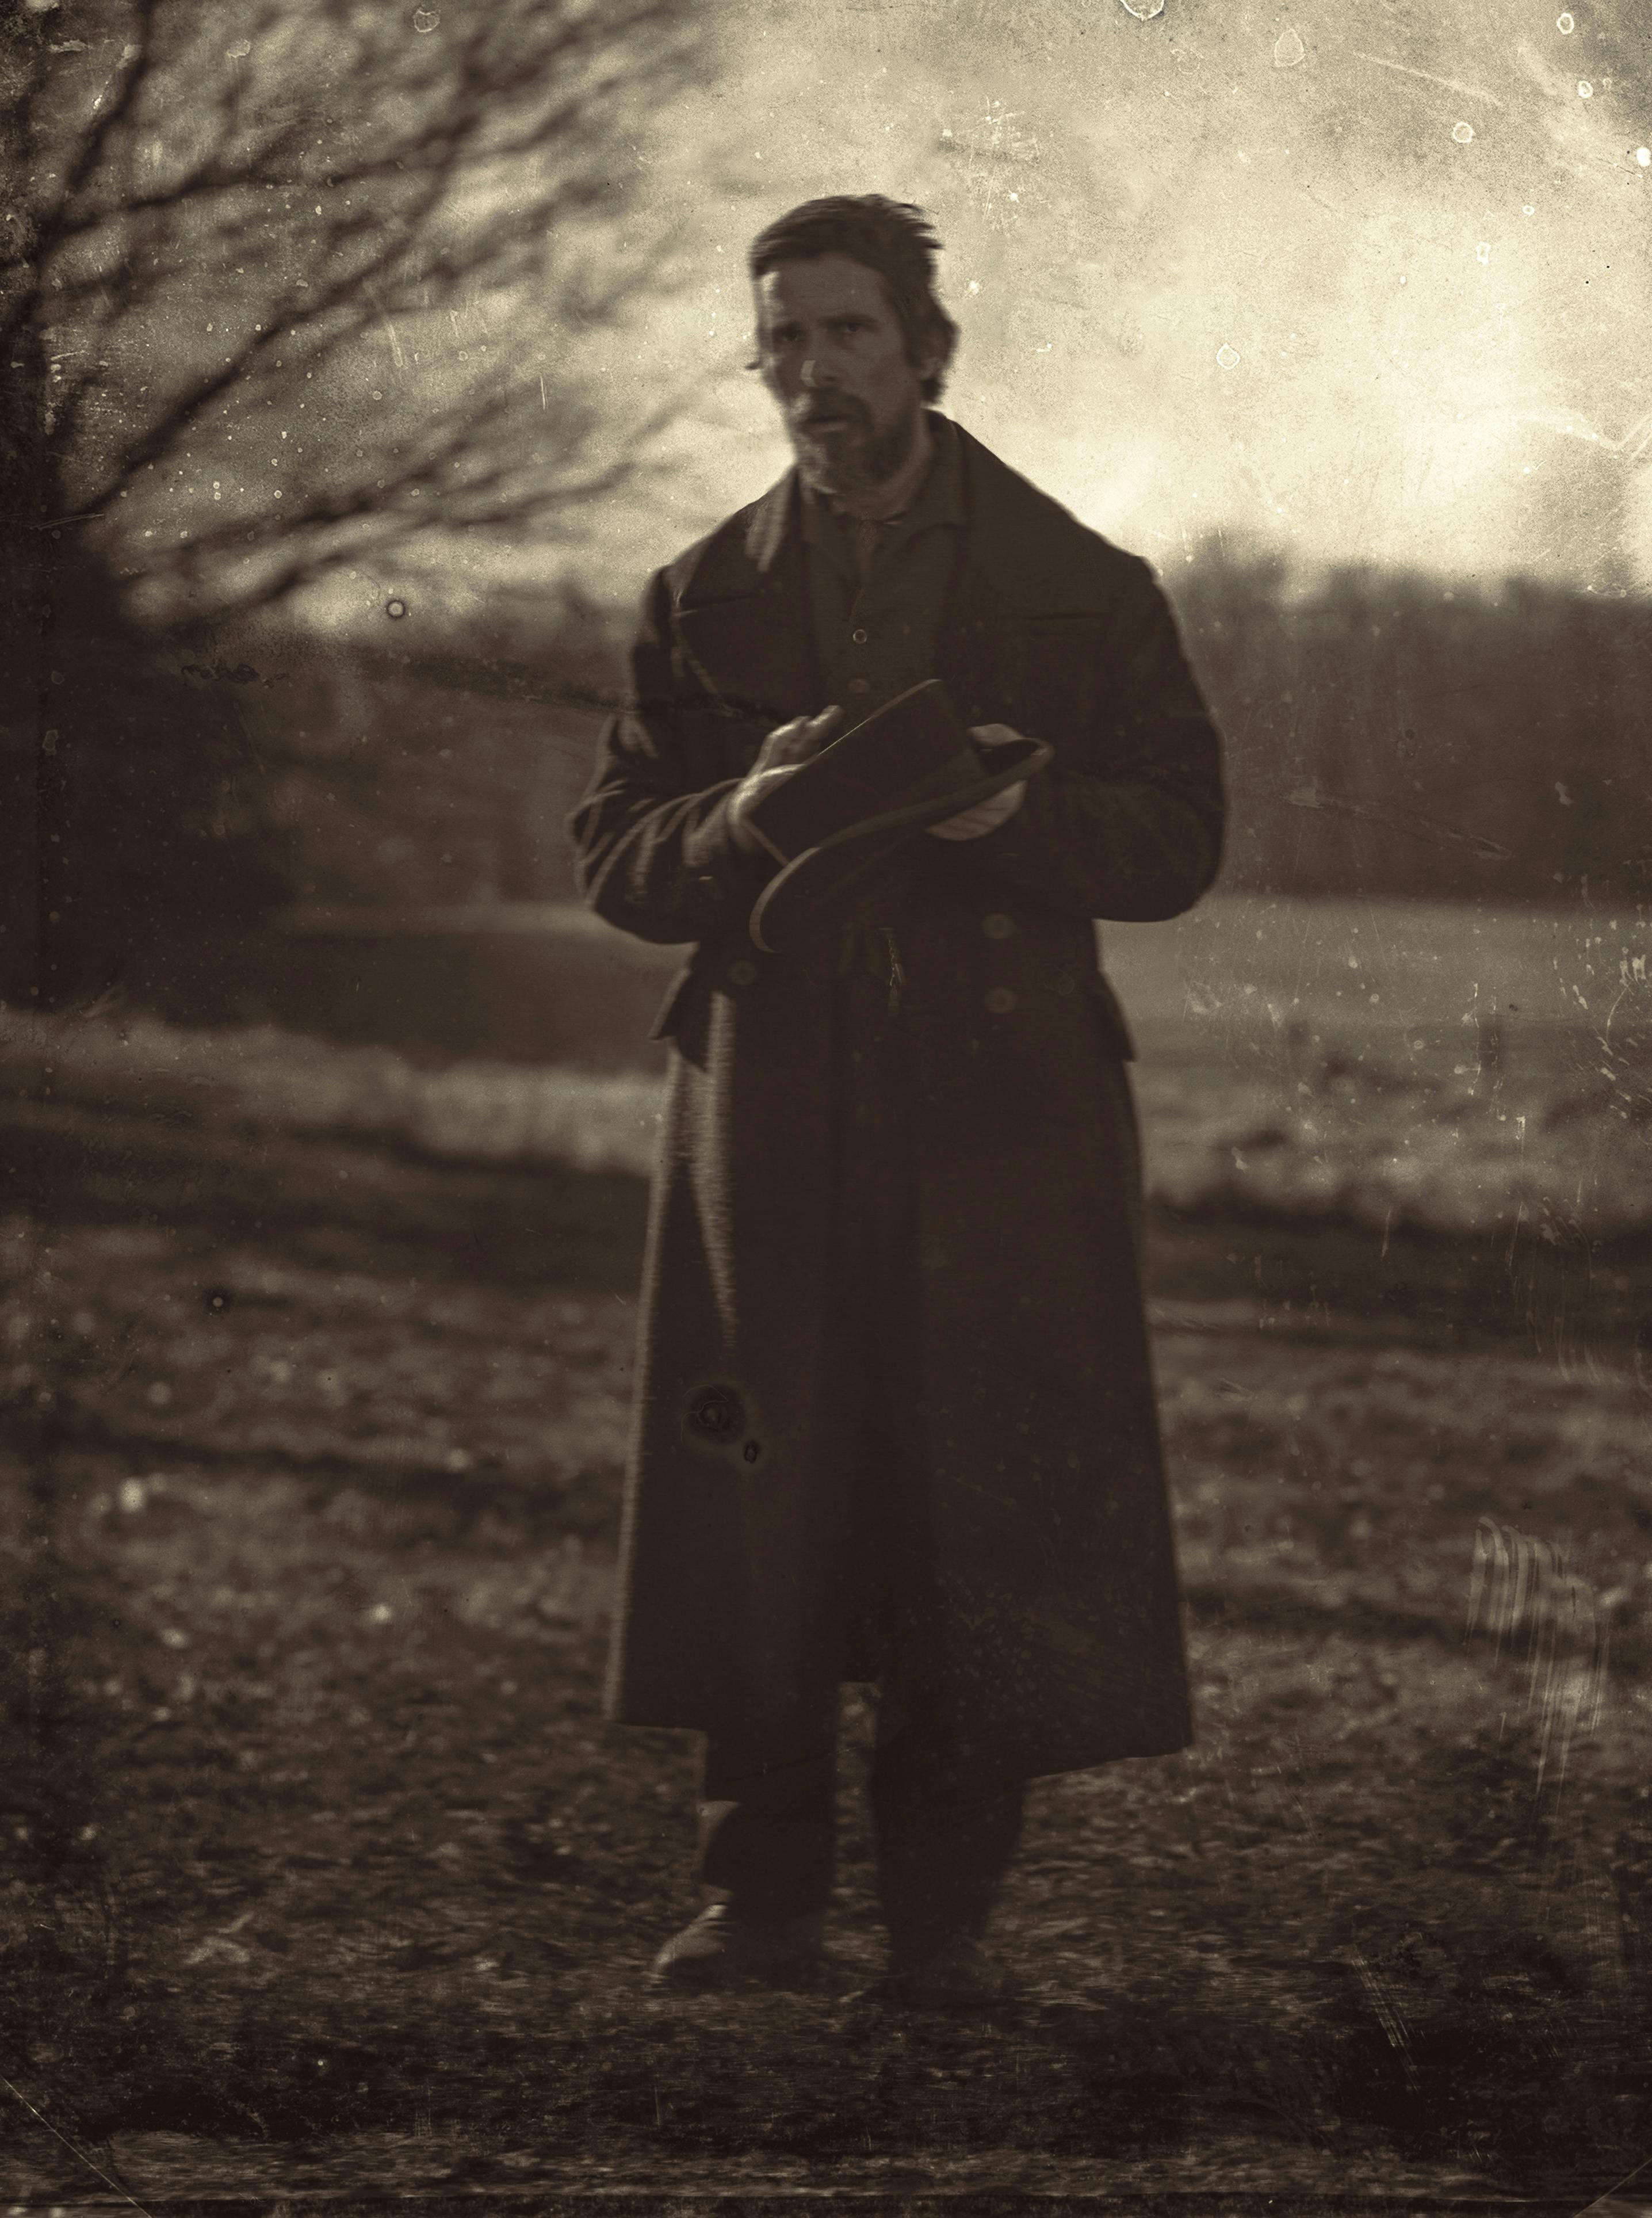 Augustus Landor (Christian Bale) wears a long coat in this sepia-toned picture.